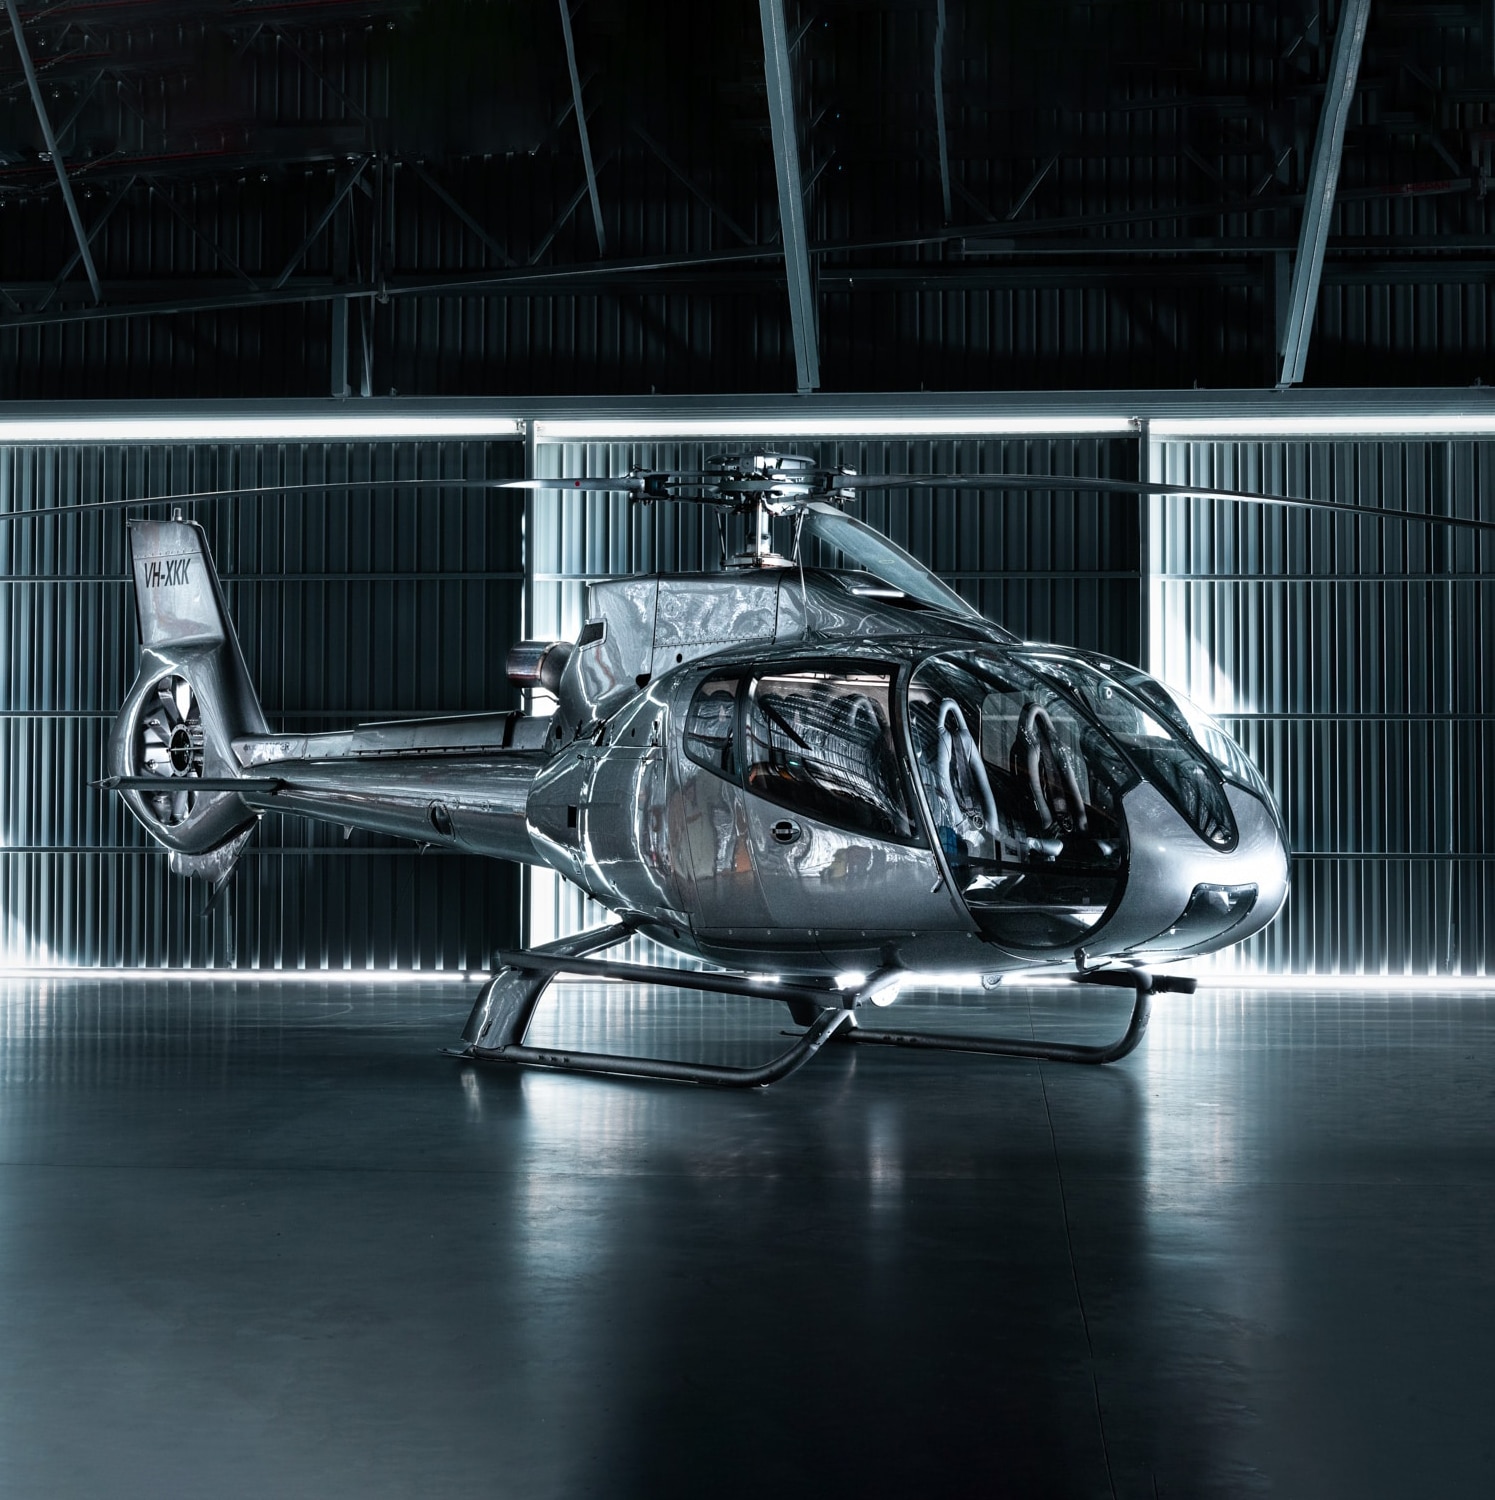 EC130 with Cabin Lights Ultra Helicopters